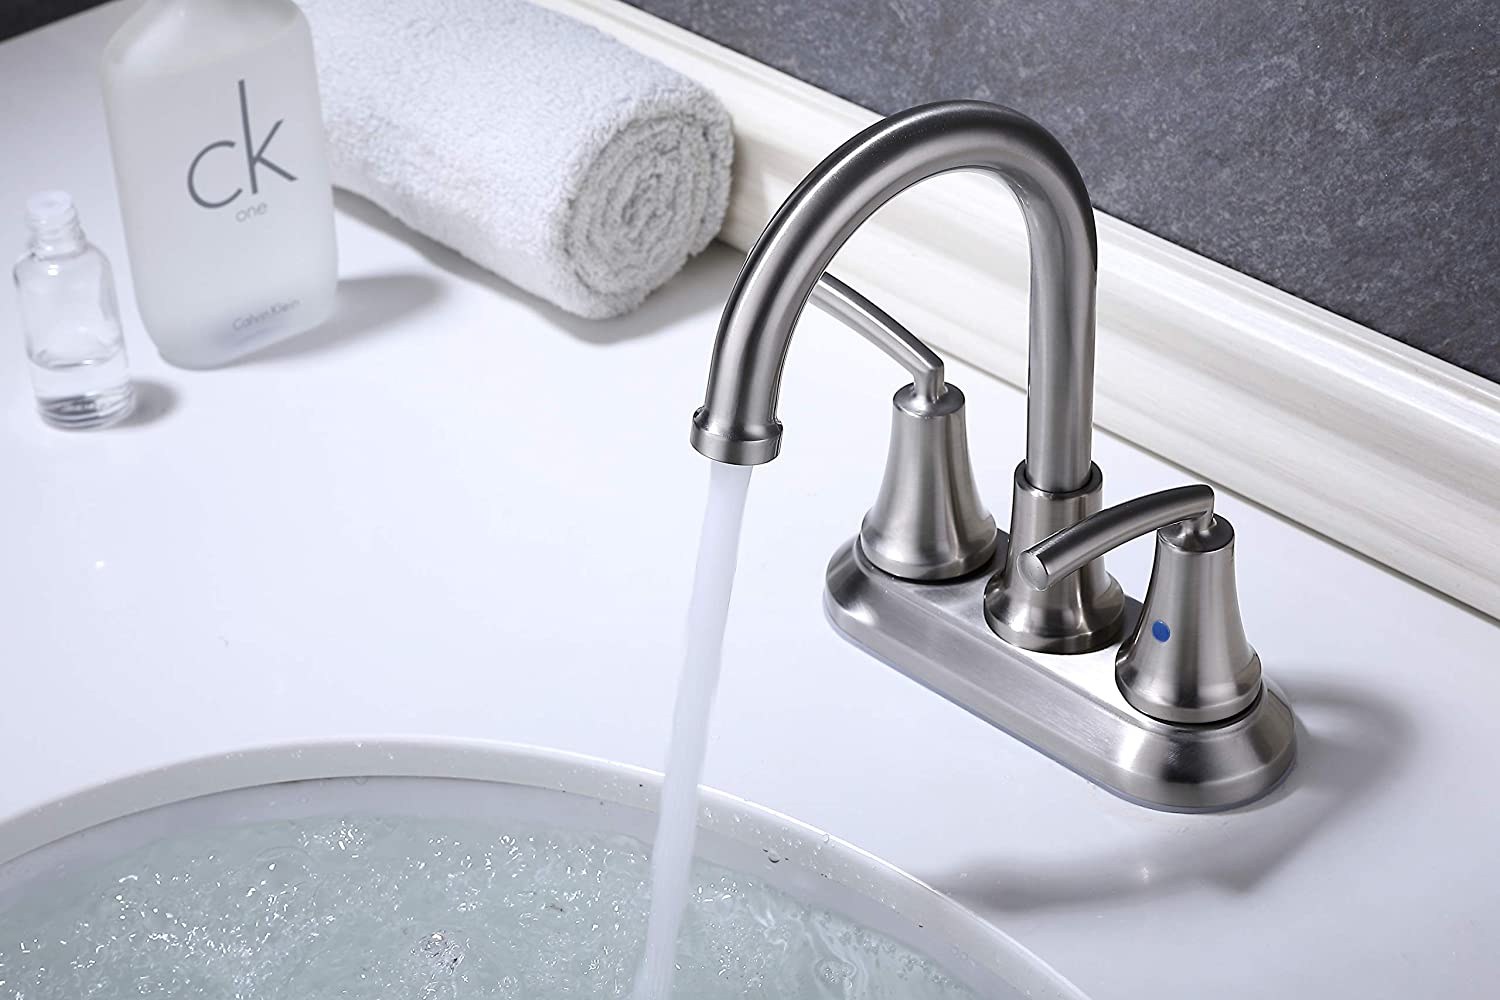 Top 10 Best Centerset Bathroom Faucets in 2020 Reviews Guide